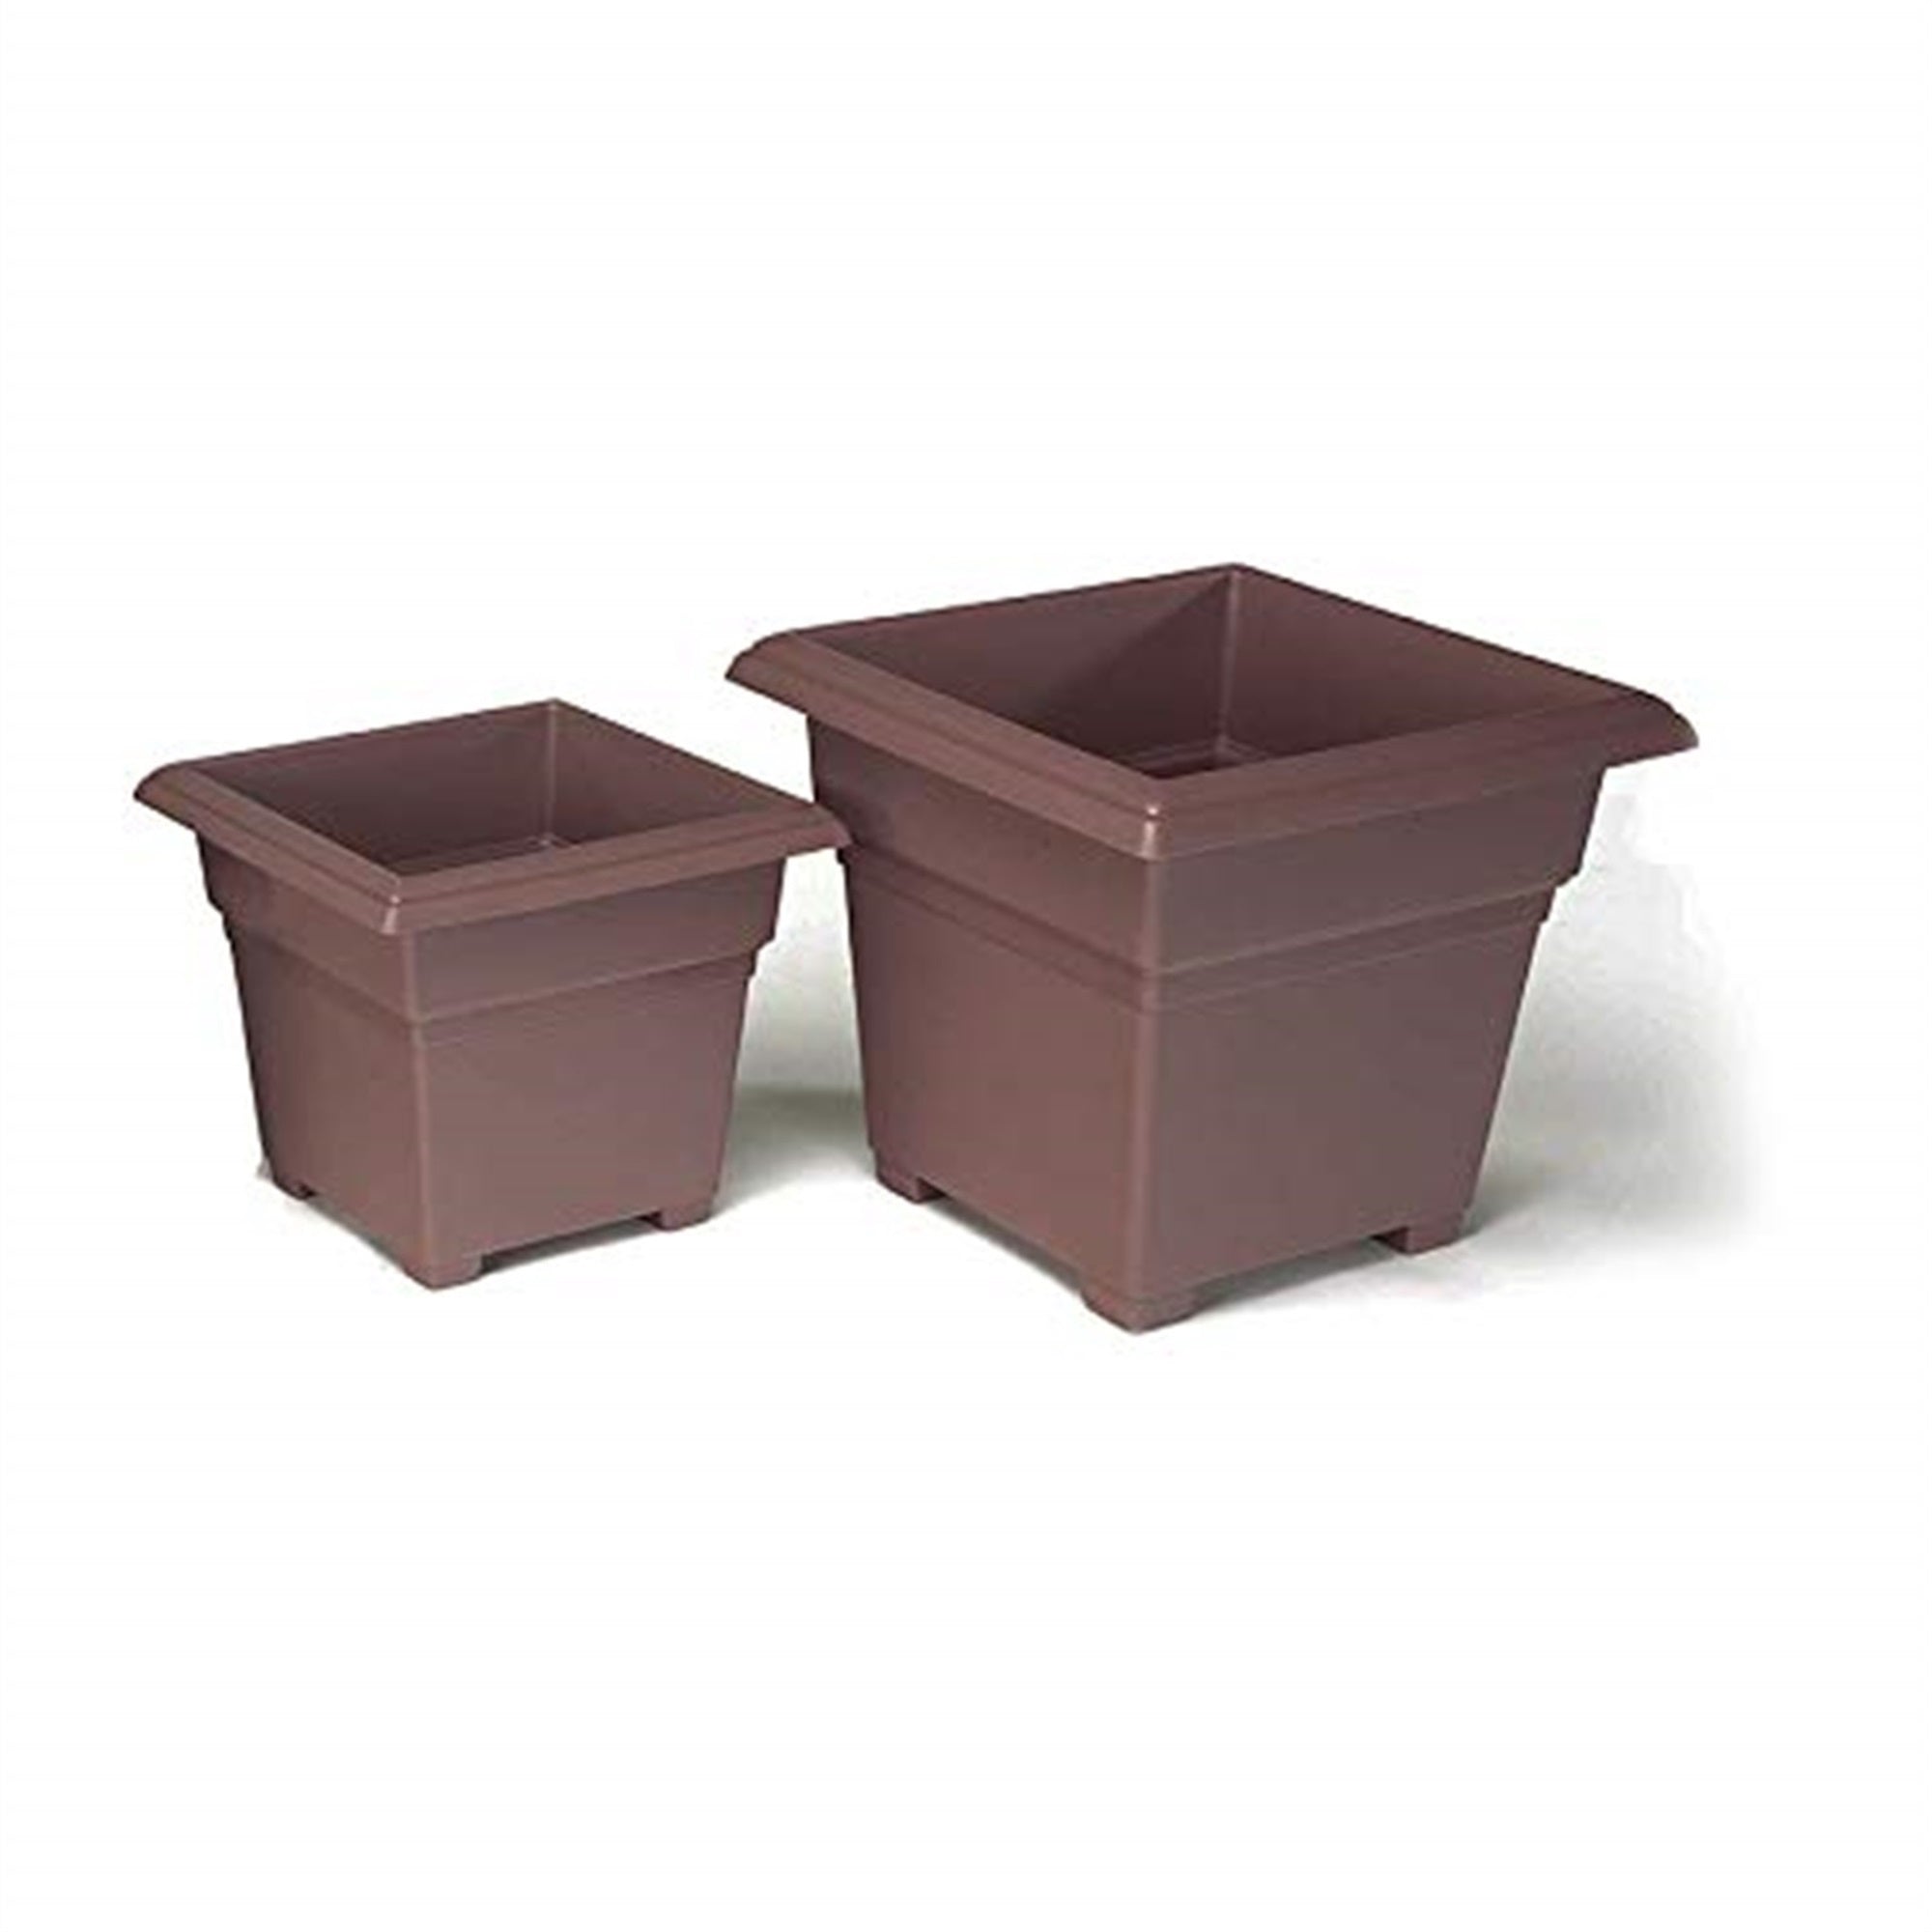 Novelty Countryside Square Tub Planter, Brown, 14 Inch